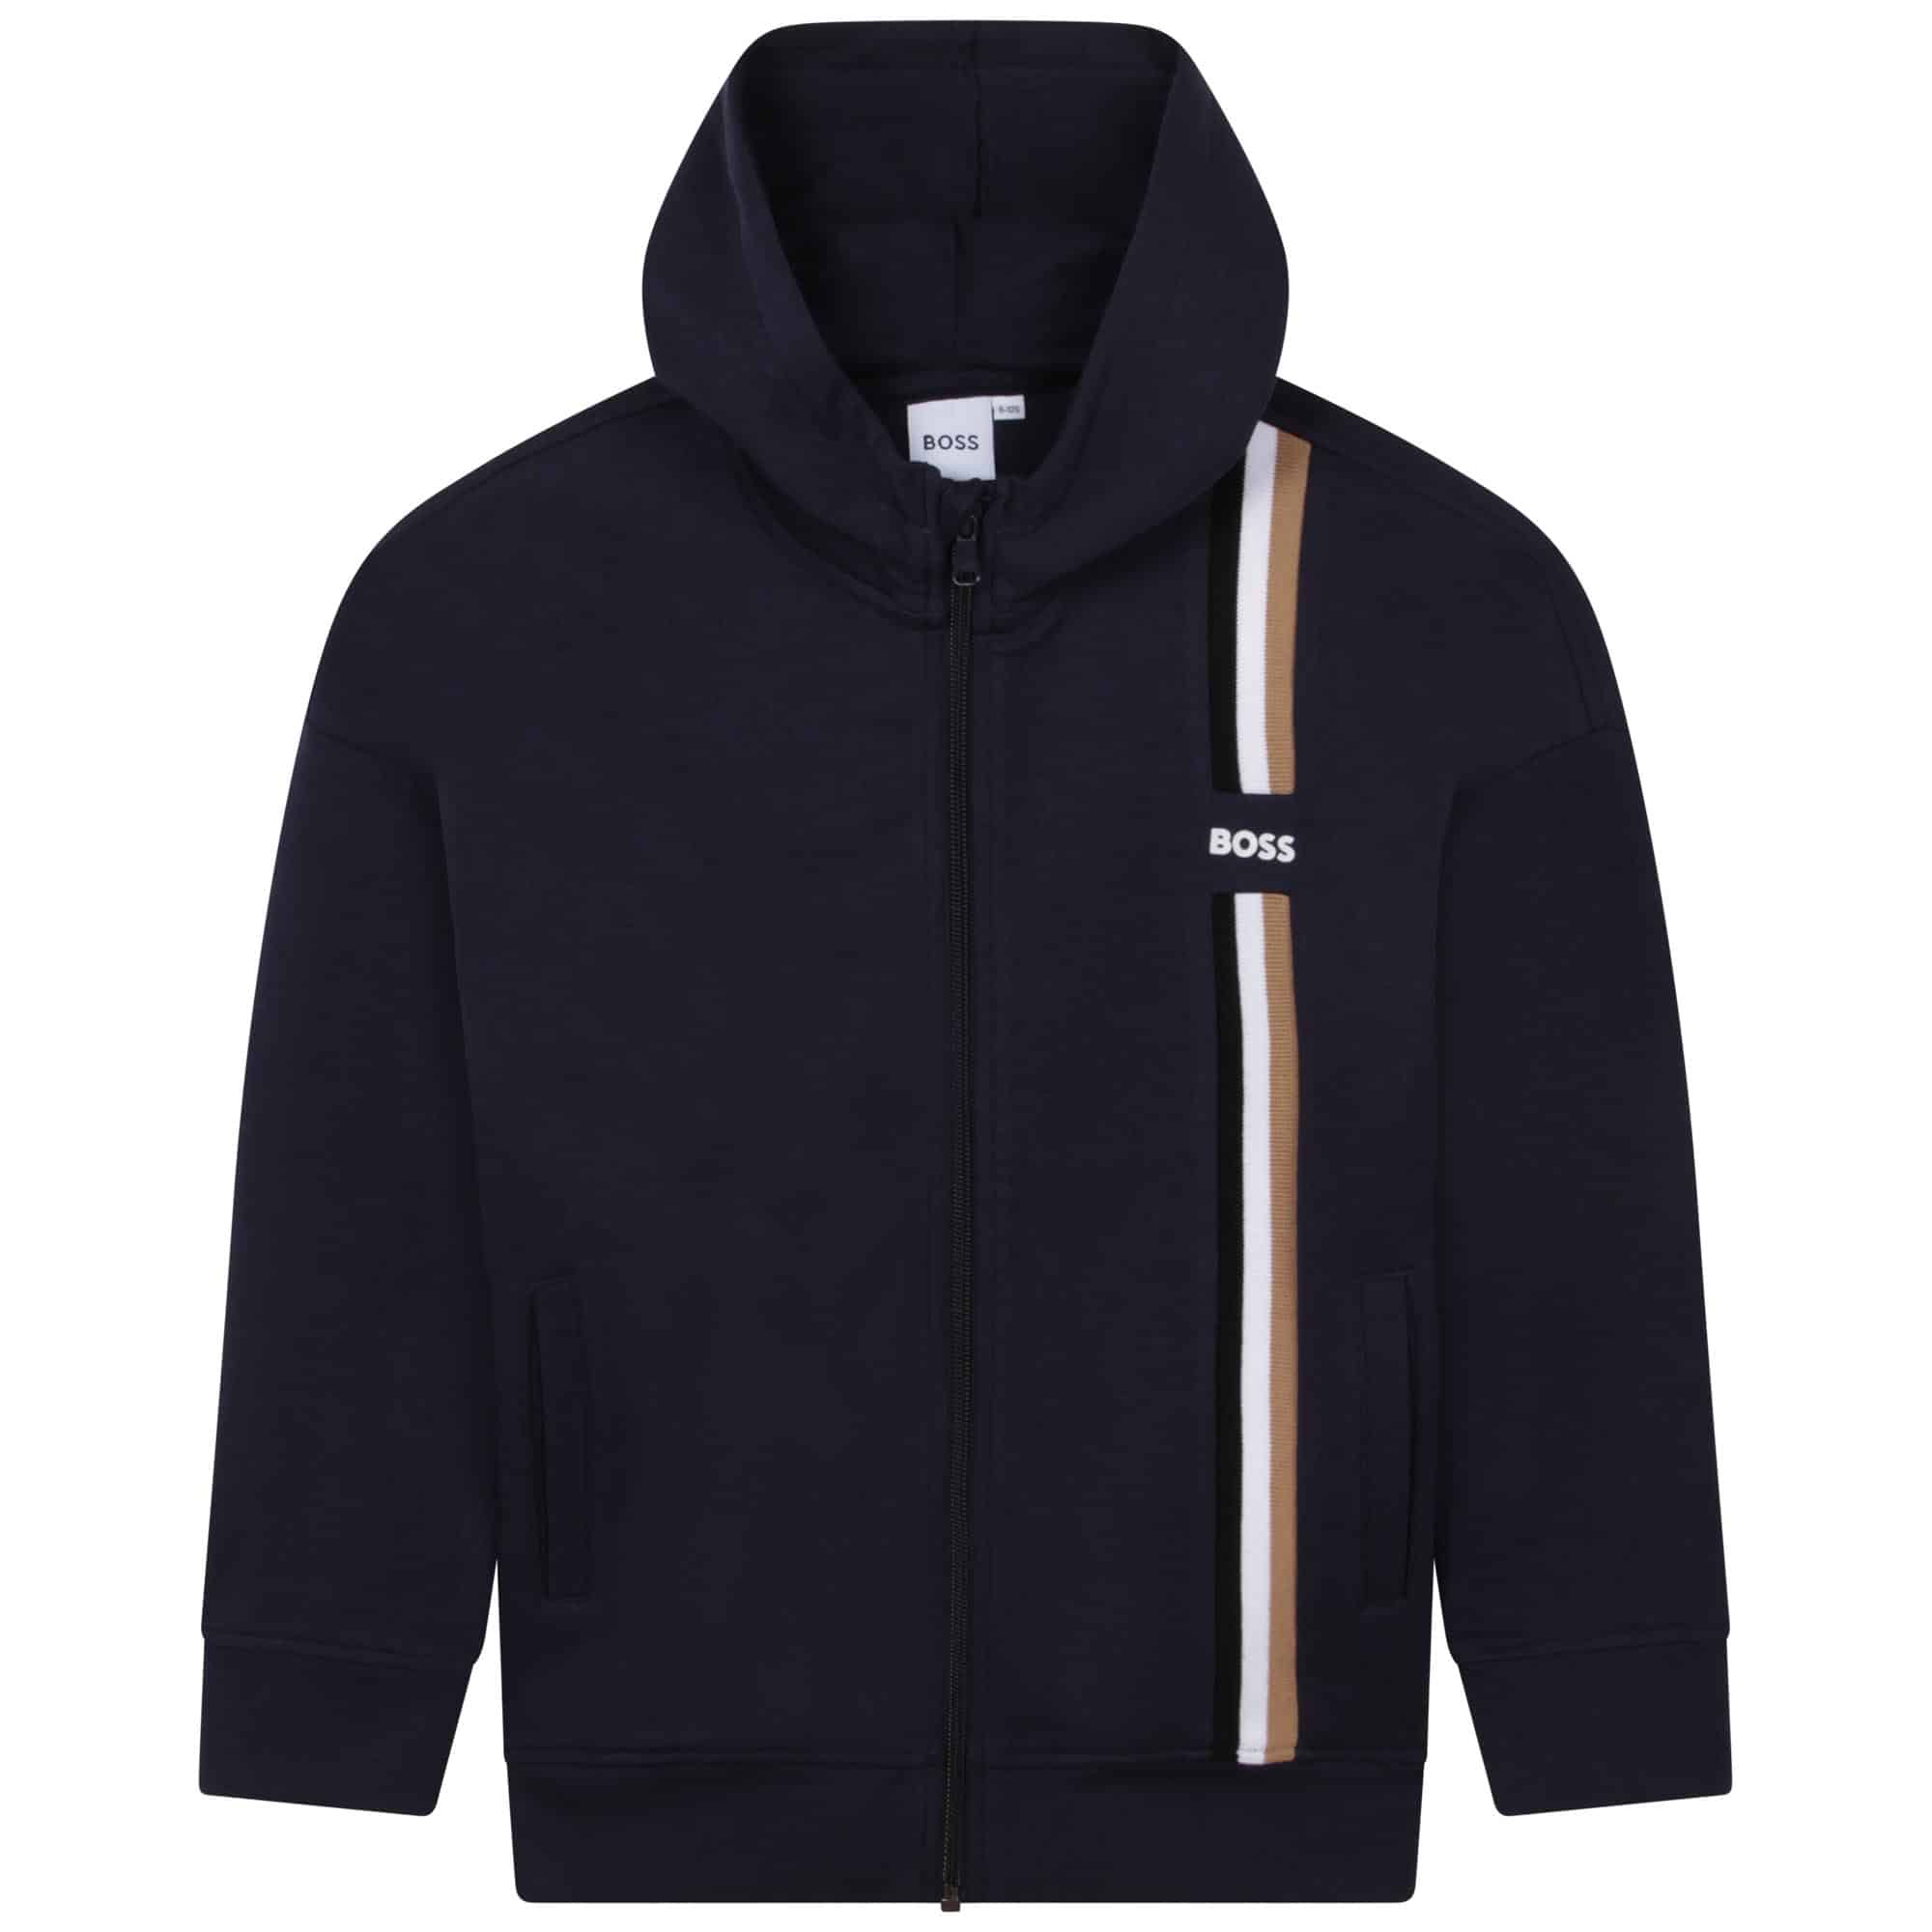 BOSS boys navy hoodie with vertical stripes